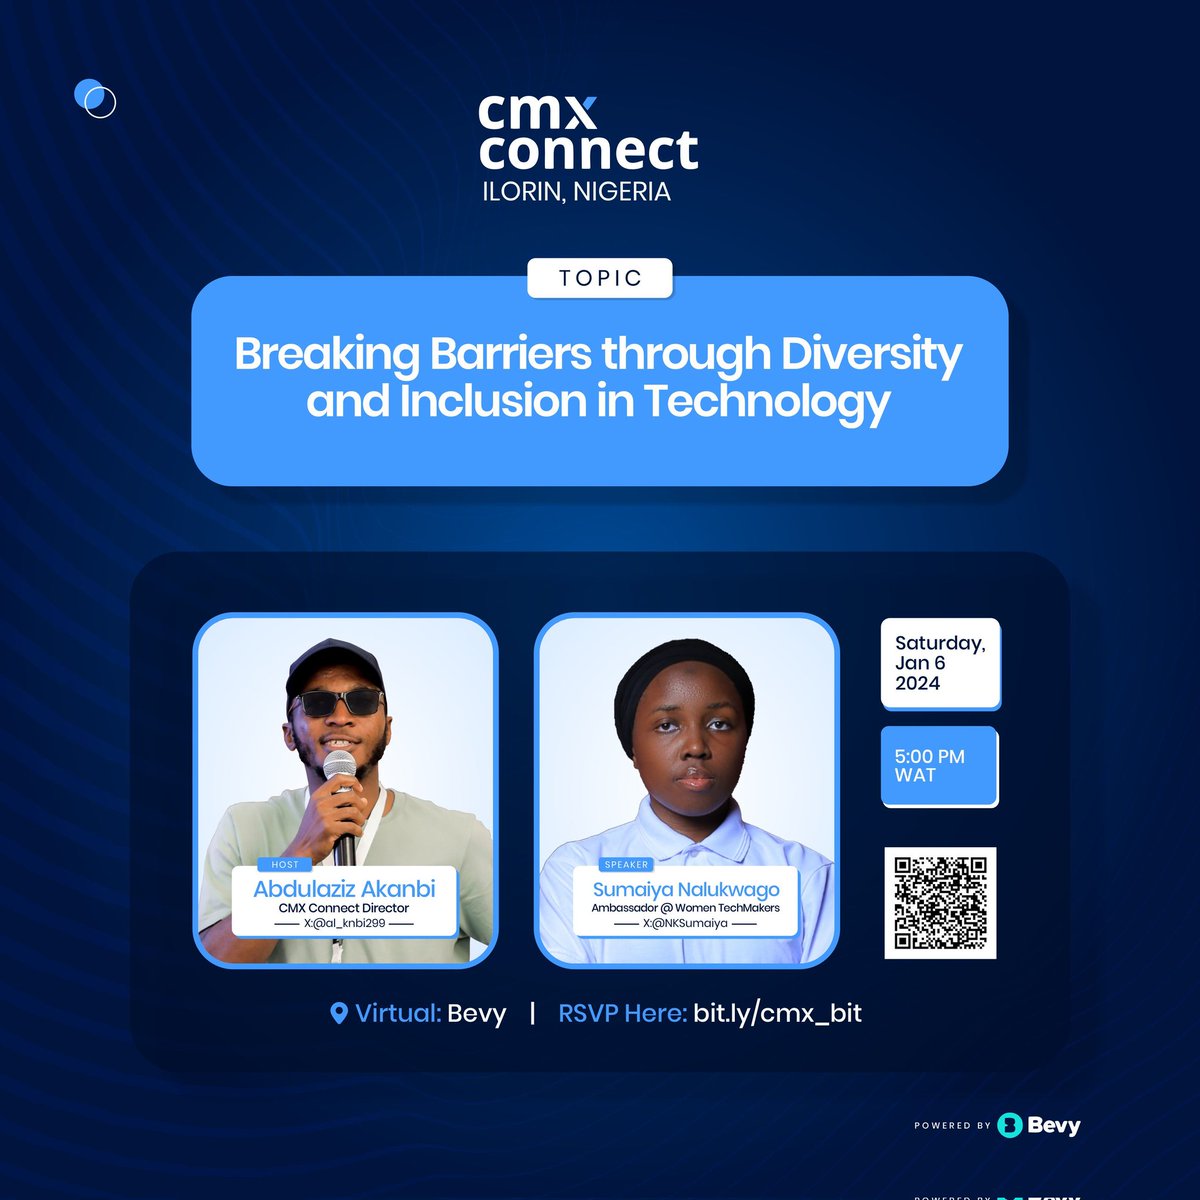 CMX is here again! This time with a groundbreaking session.

Featuring: Guest Speaker @NKSumaiya Ambassador @WomenTechmakers

Register here:
Bit.ly/cmx_bit 

#Techinclusion #cmxconnect #cmx_ilorin #community #bevy #cmx #TechDiversity